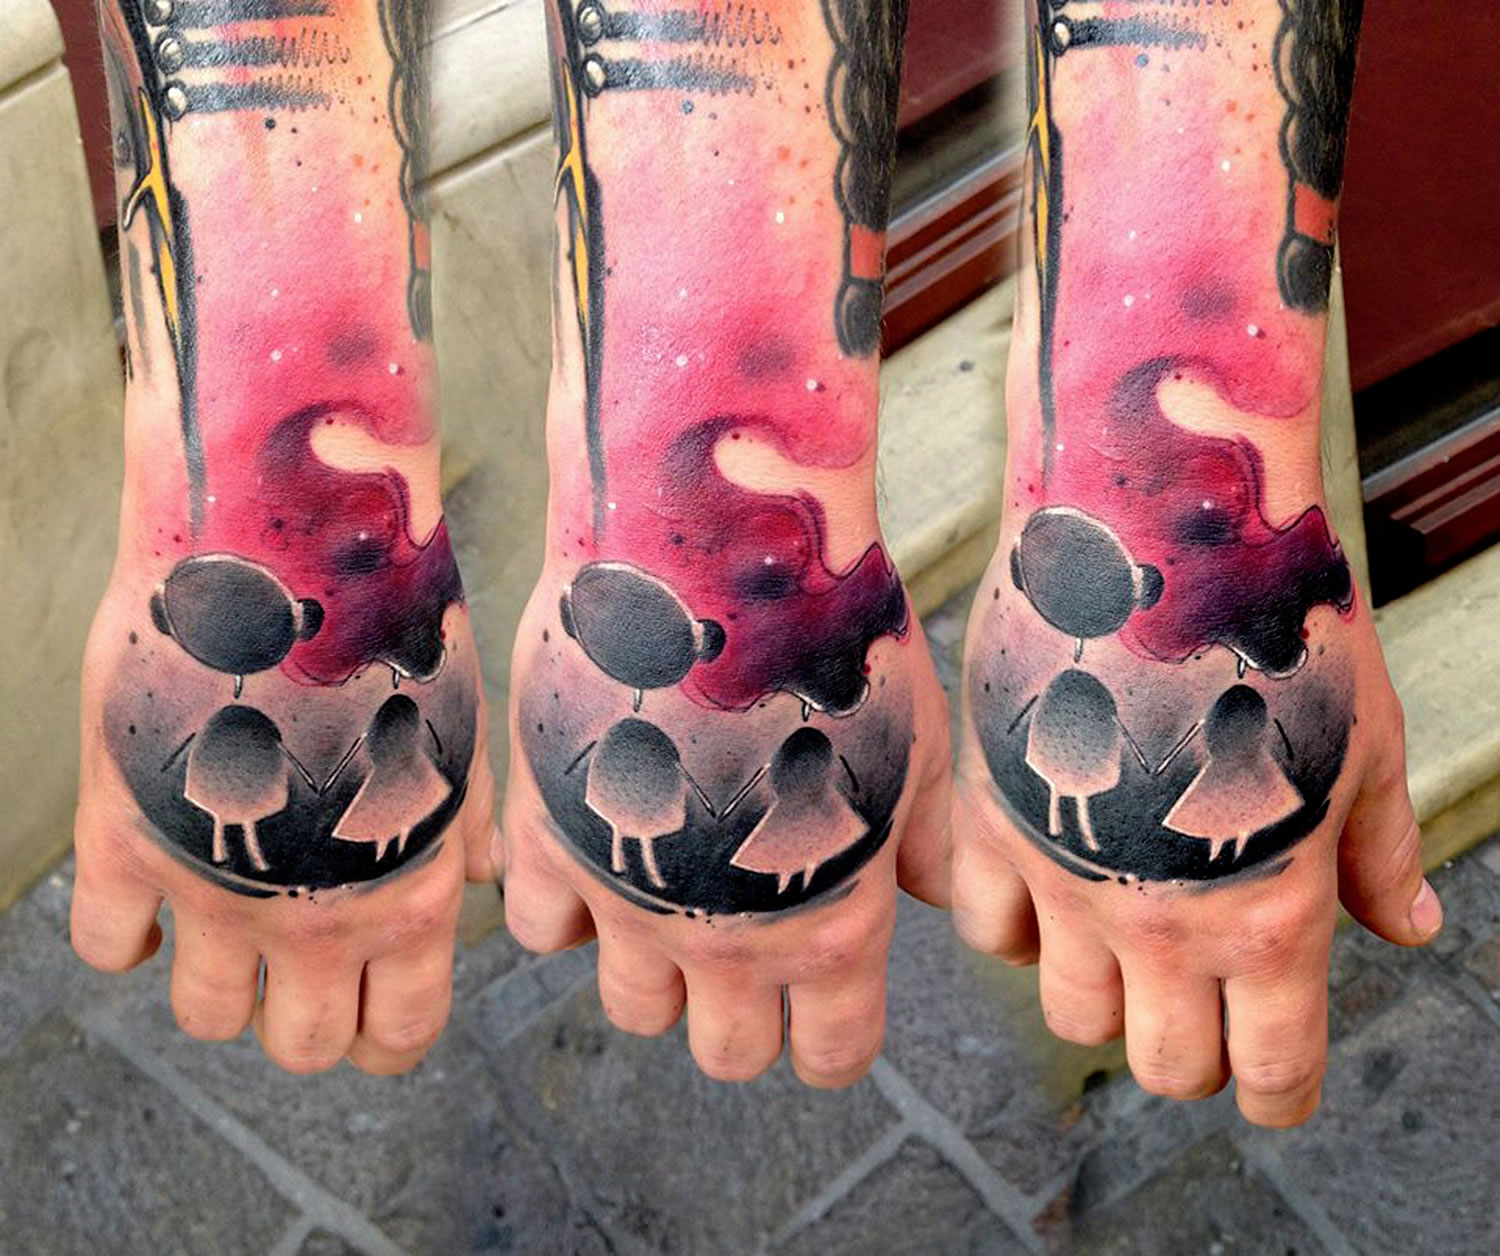 pink and black tattoo on hand and arm by Lukasz Bam Kaczmarek